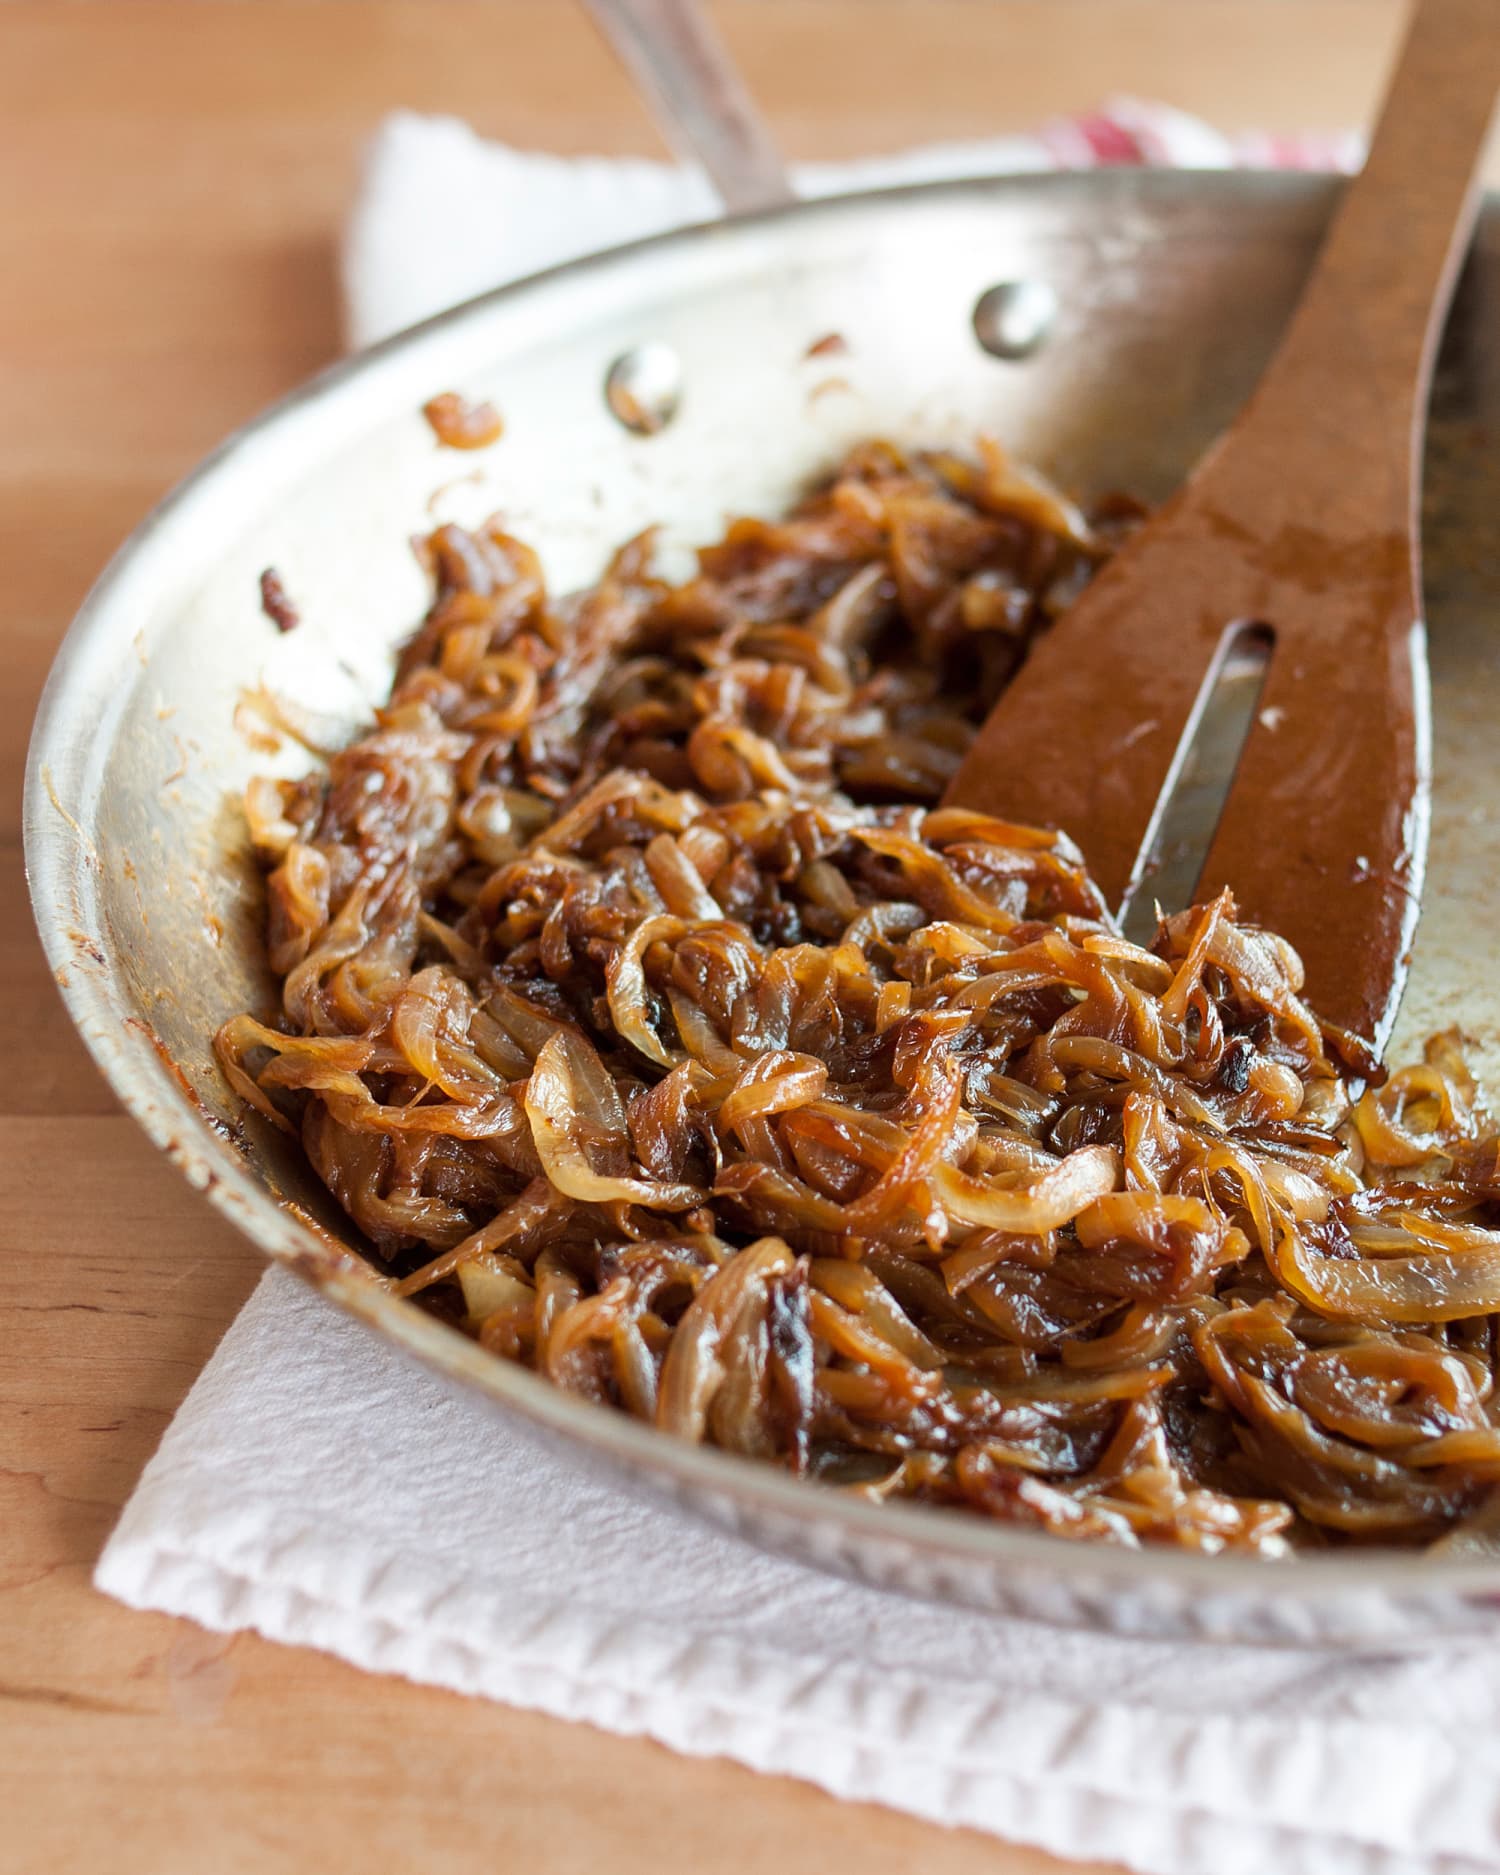 How To Caramelize Onions | Kitchn